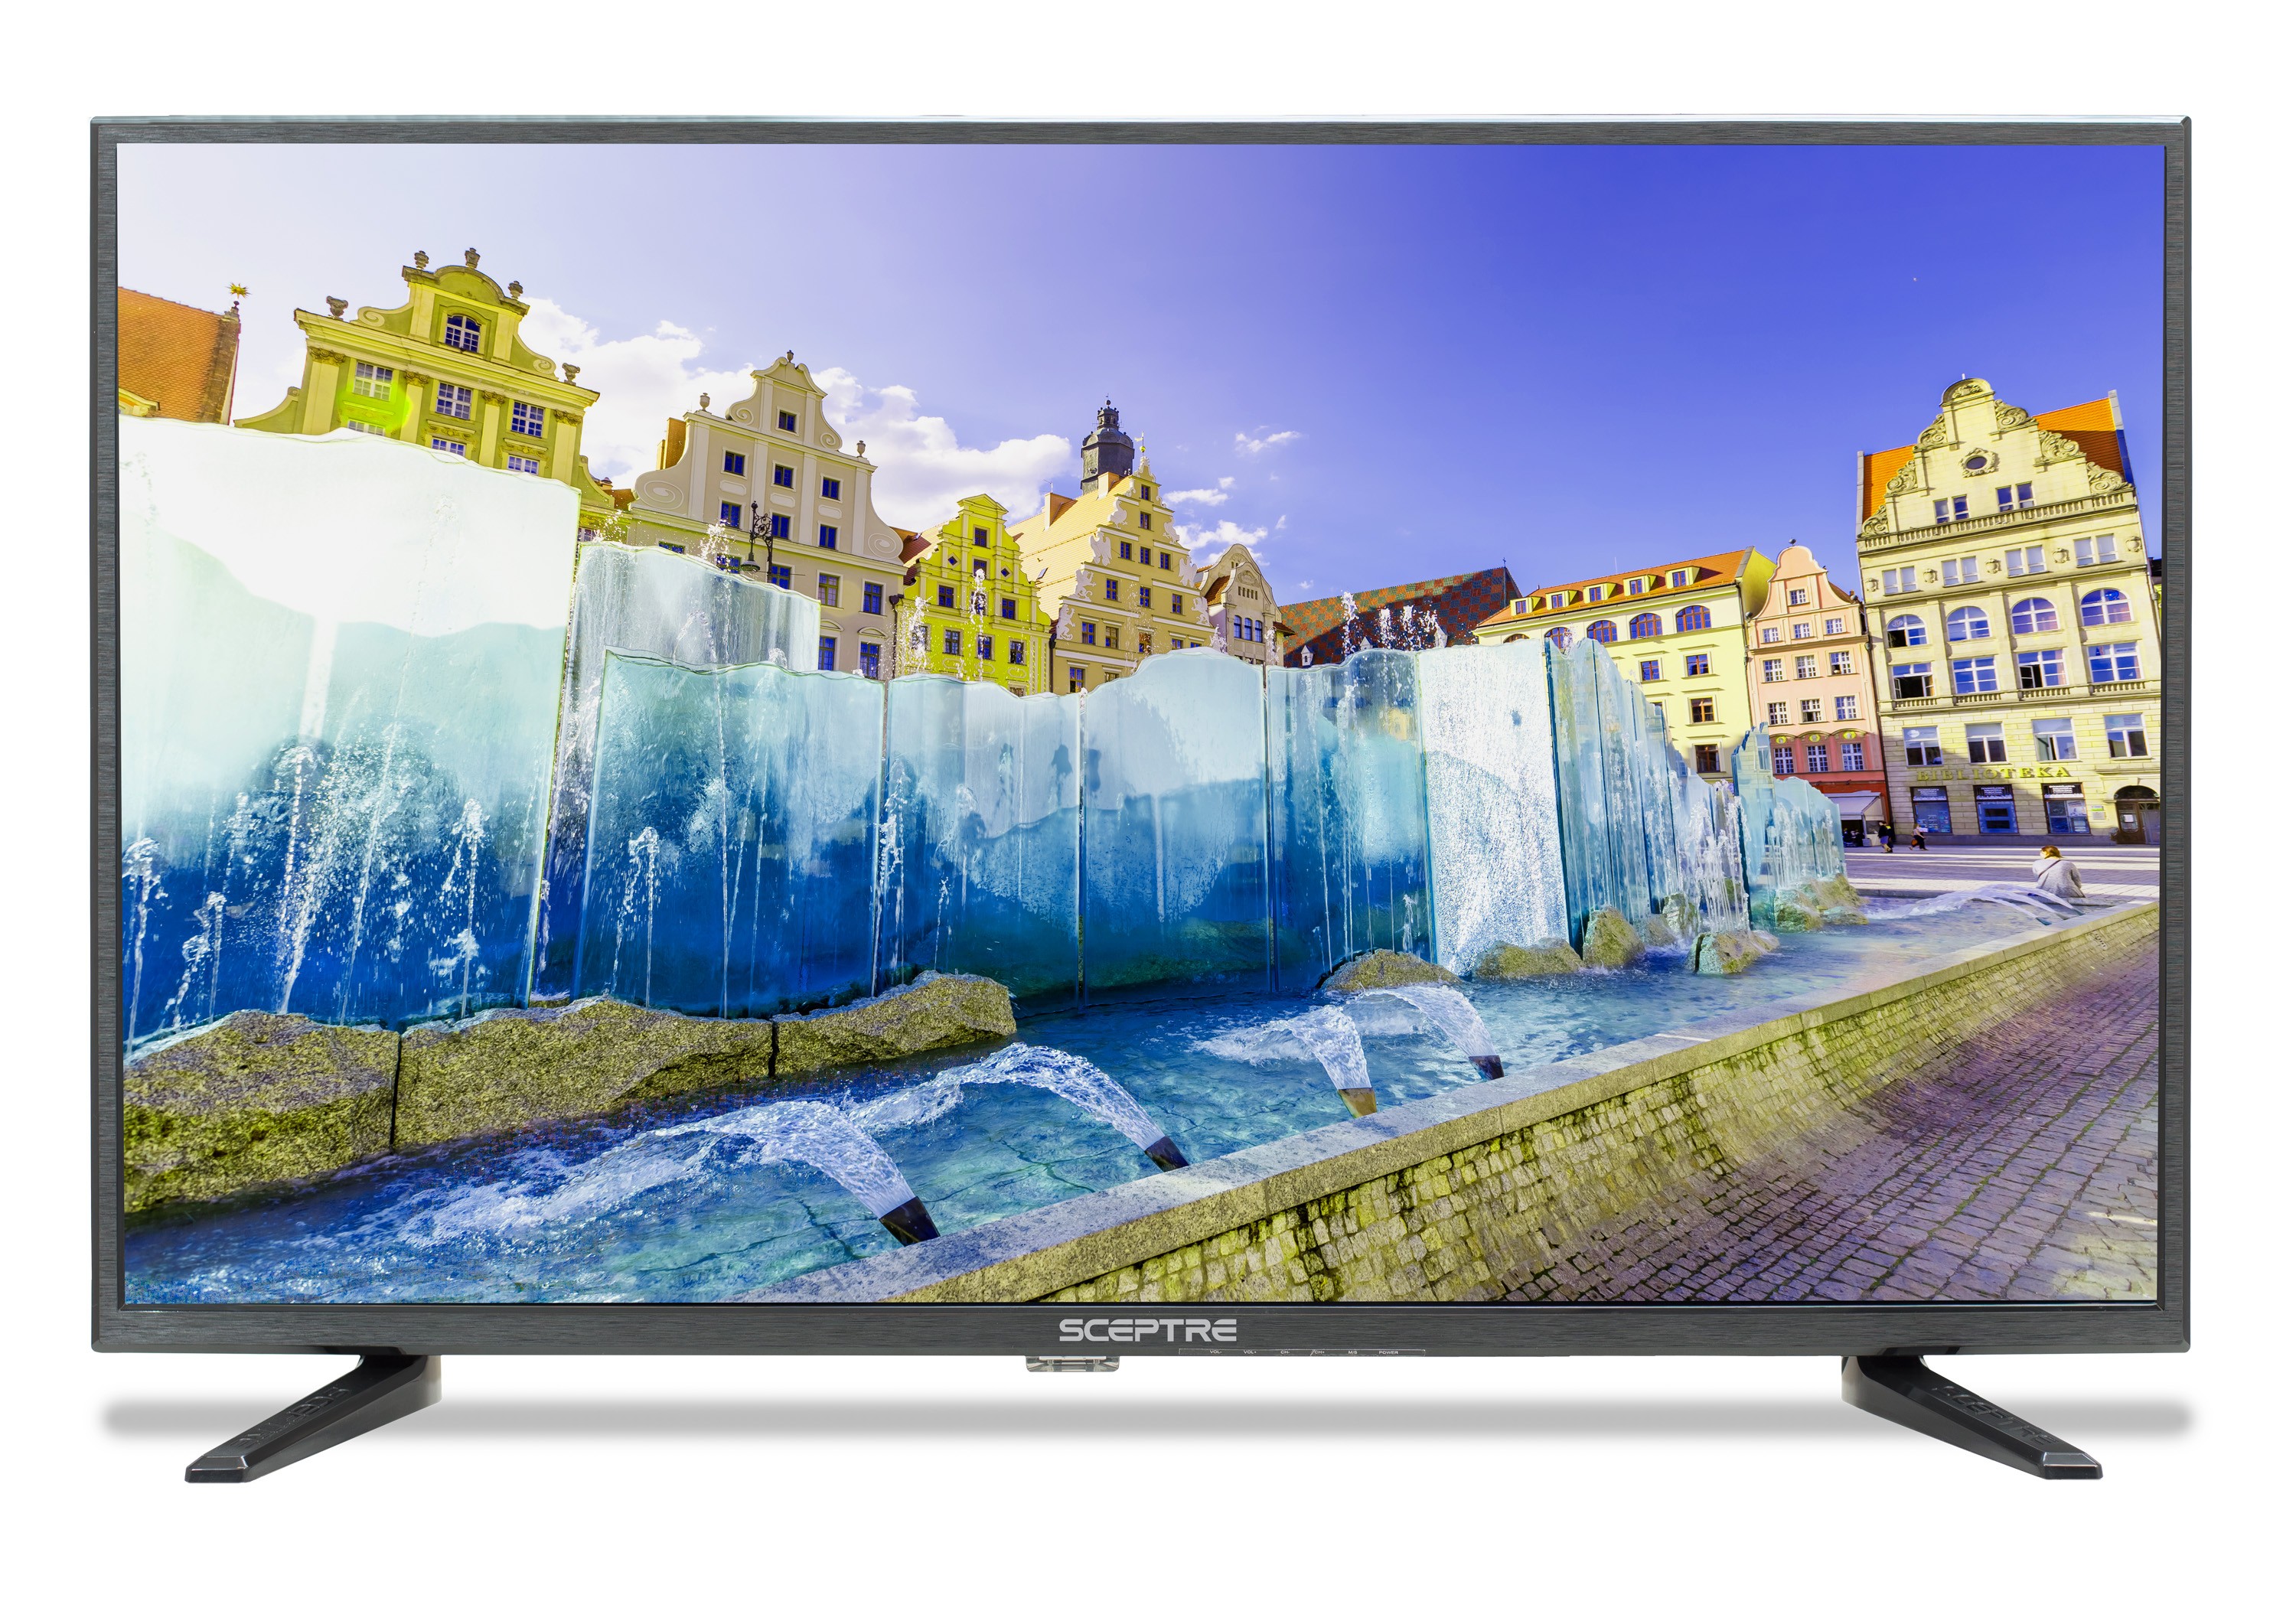 Sceptre 32" Class FHD (1080P) LED TV (E325BD-F) with Built-in DVD Player - image 1 of 4